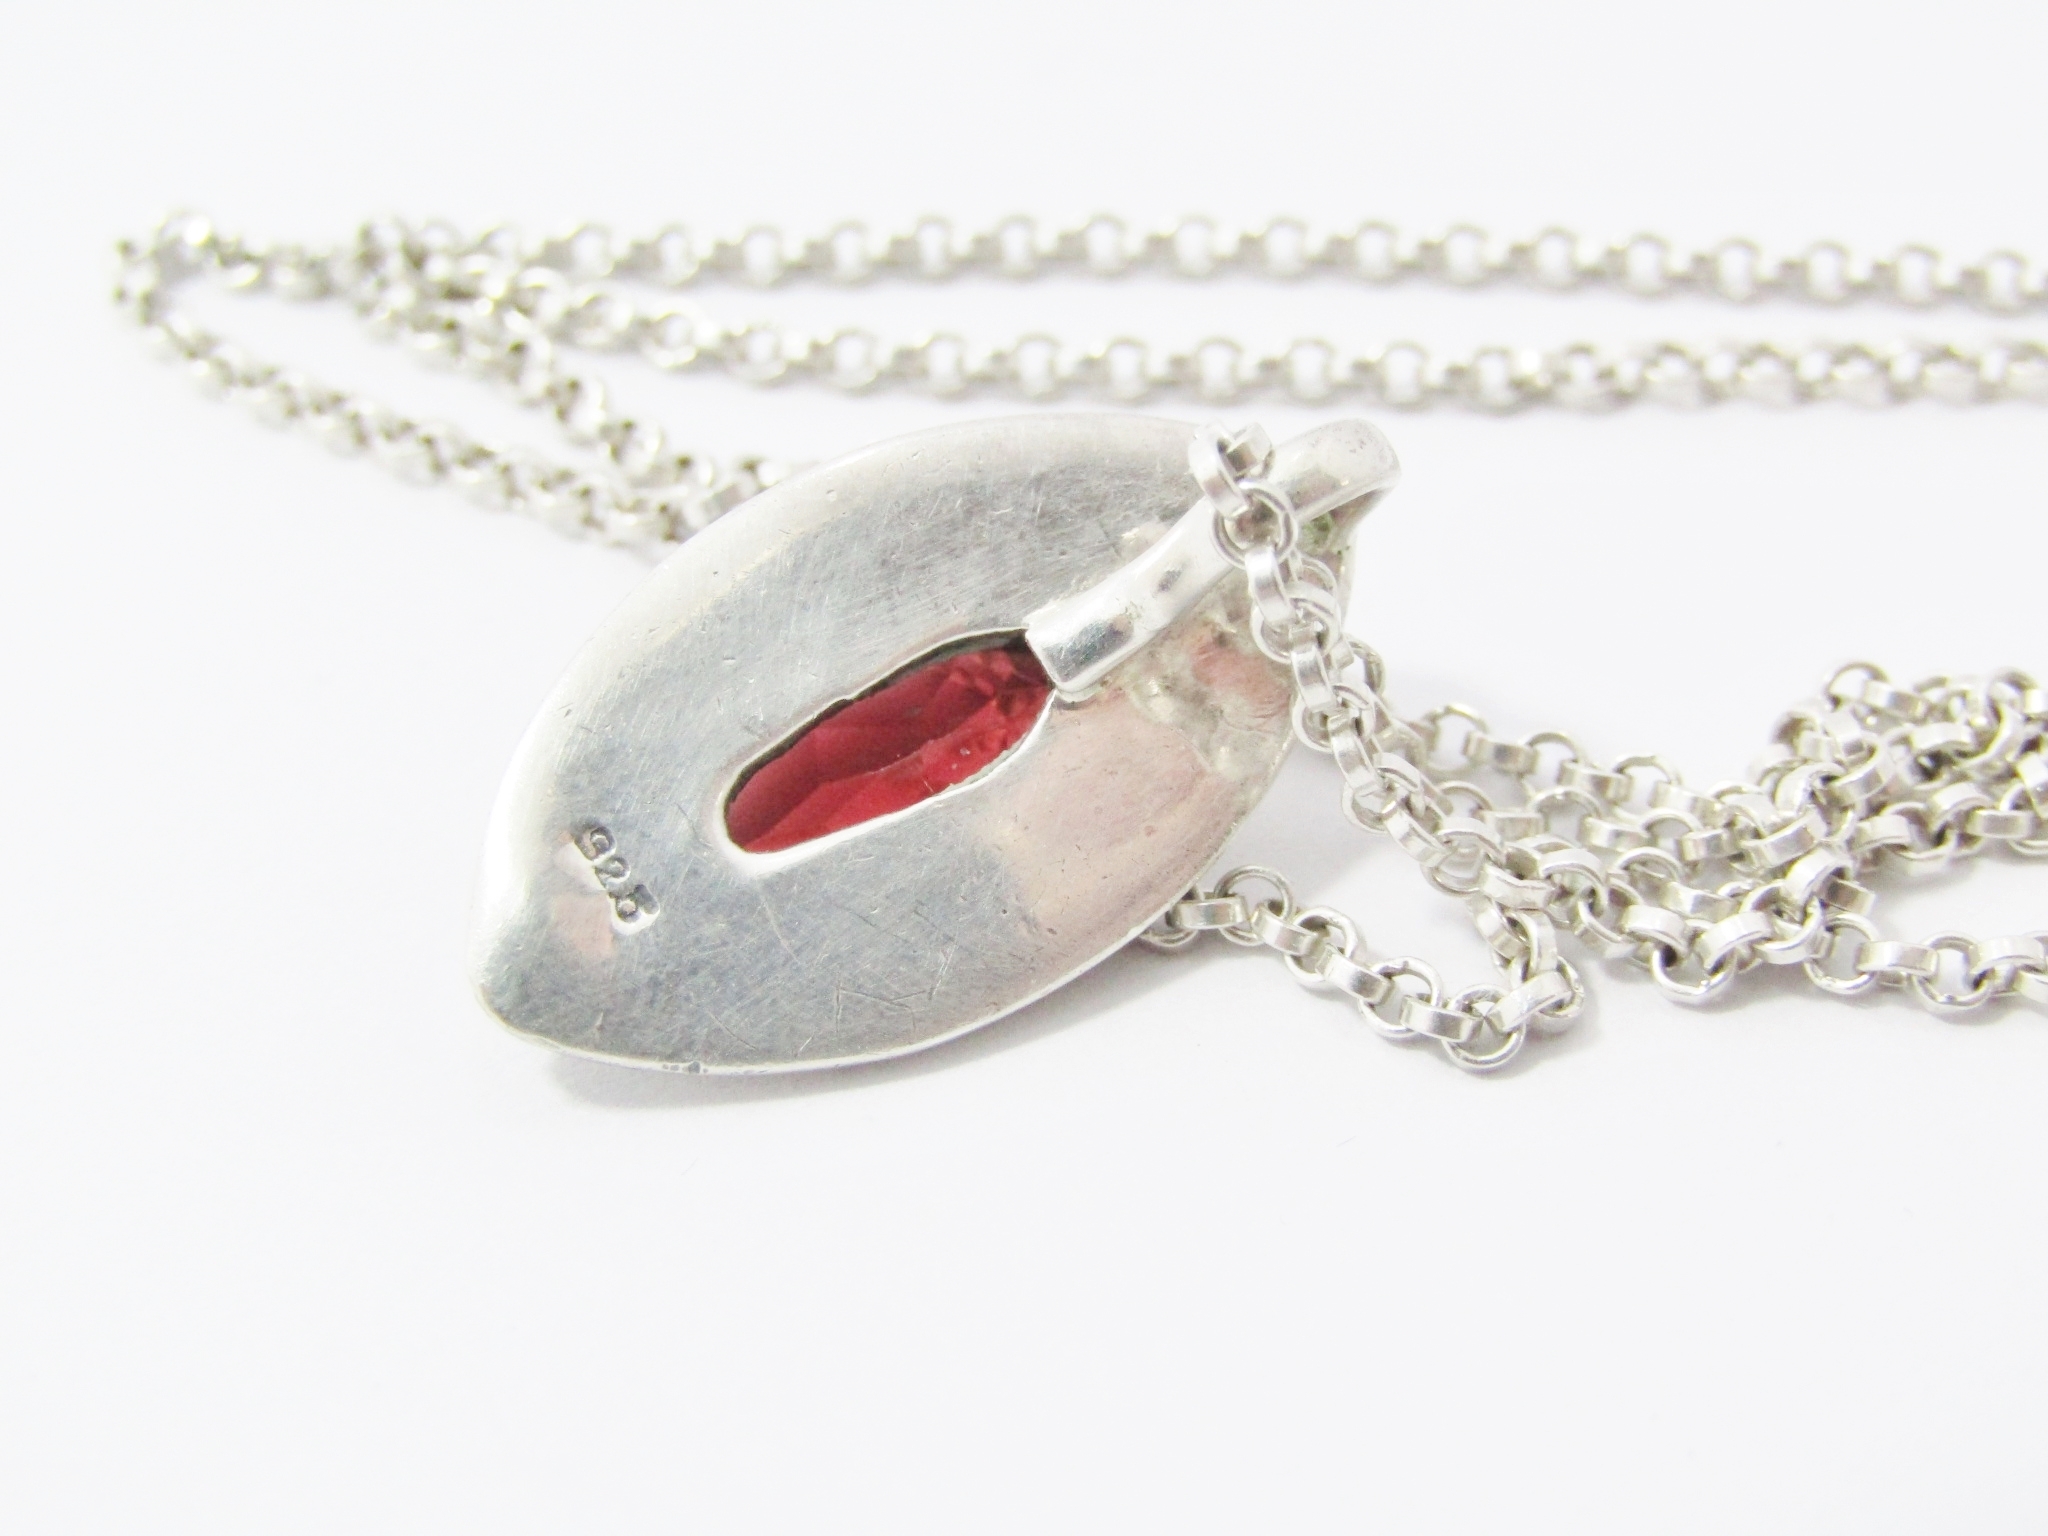 Stunning Two Tone Bronze And Silver Pendant With a Garnet On Chain in Sterling Silver.